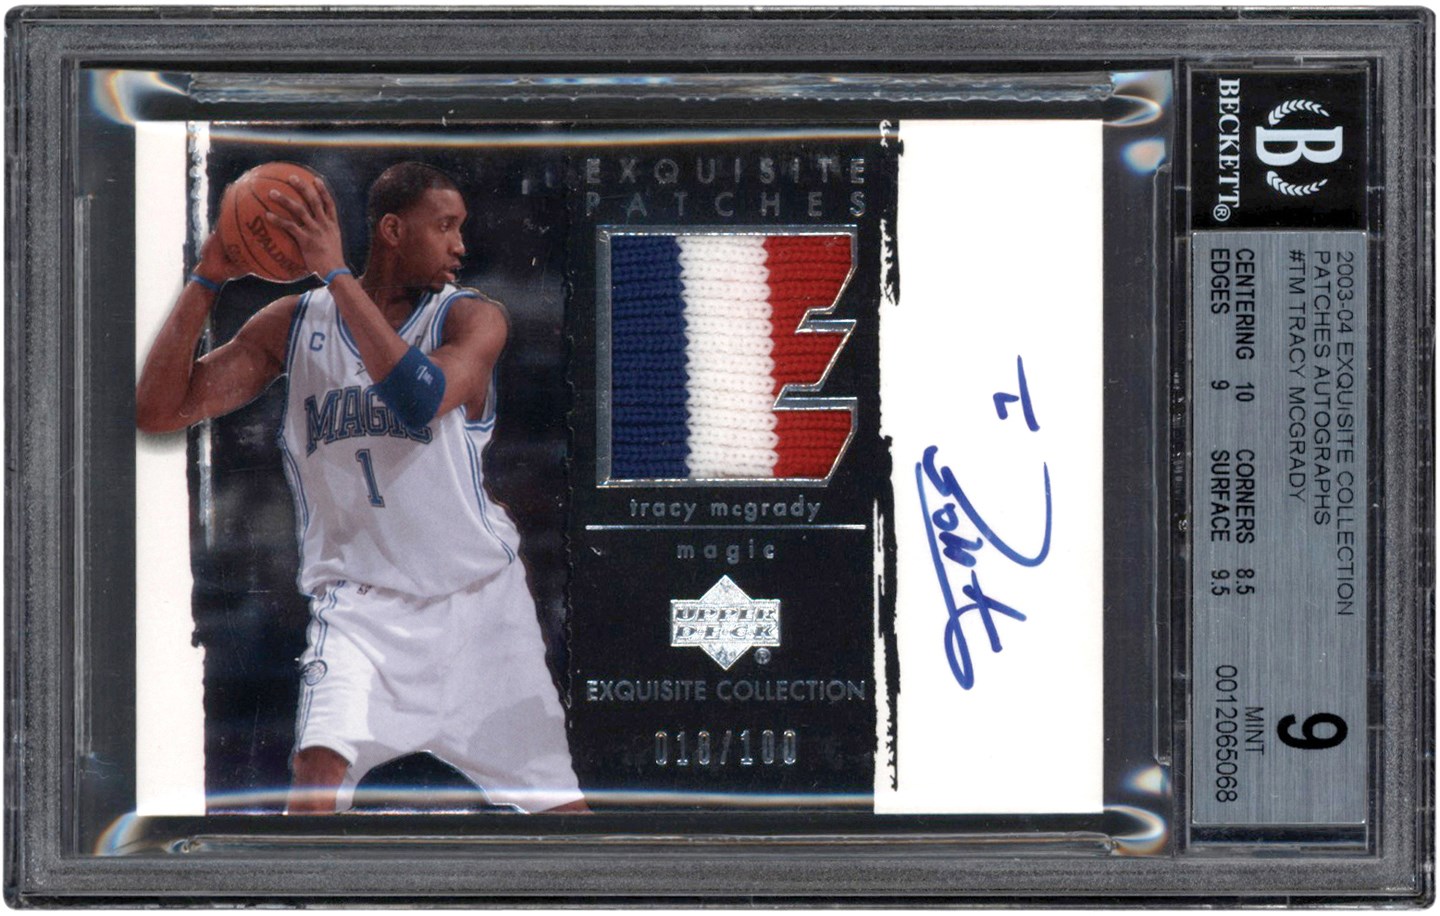 - 2003-2004 UD Exquisite Basketball Collection Patches Autographs #TM Tracy McGrady Signed NBA All Star Game Used Patch #18/100 BGS MINT 9 Auto 10